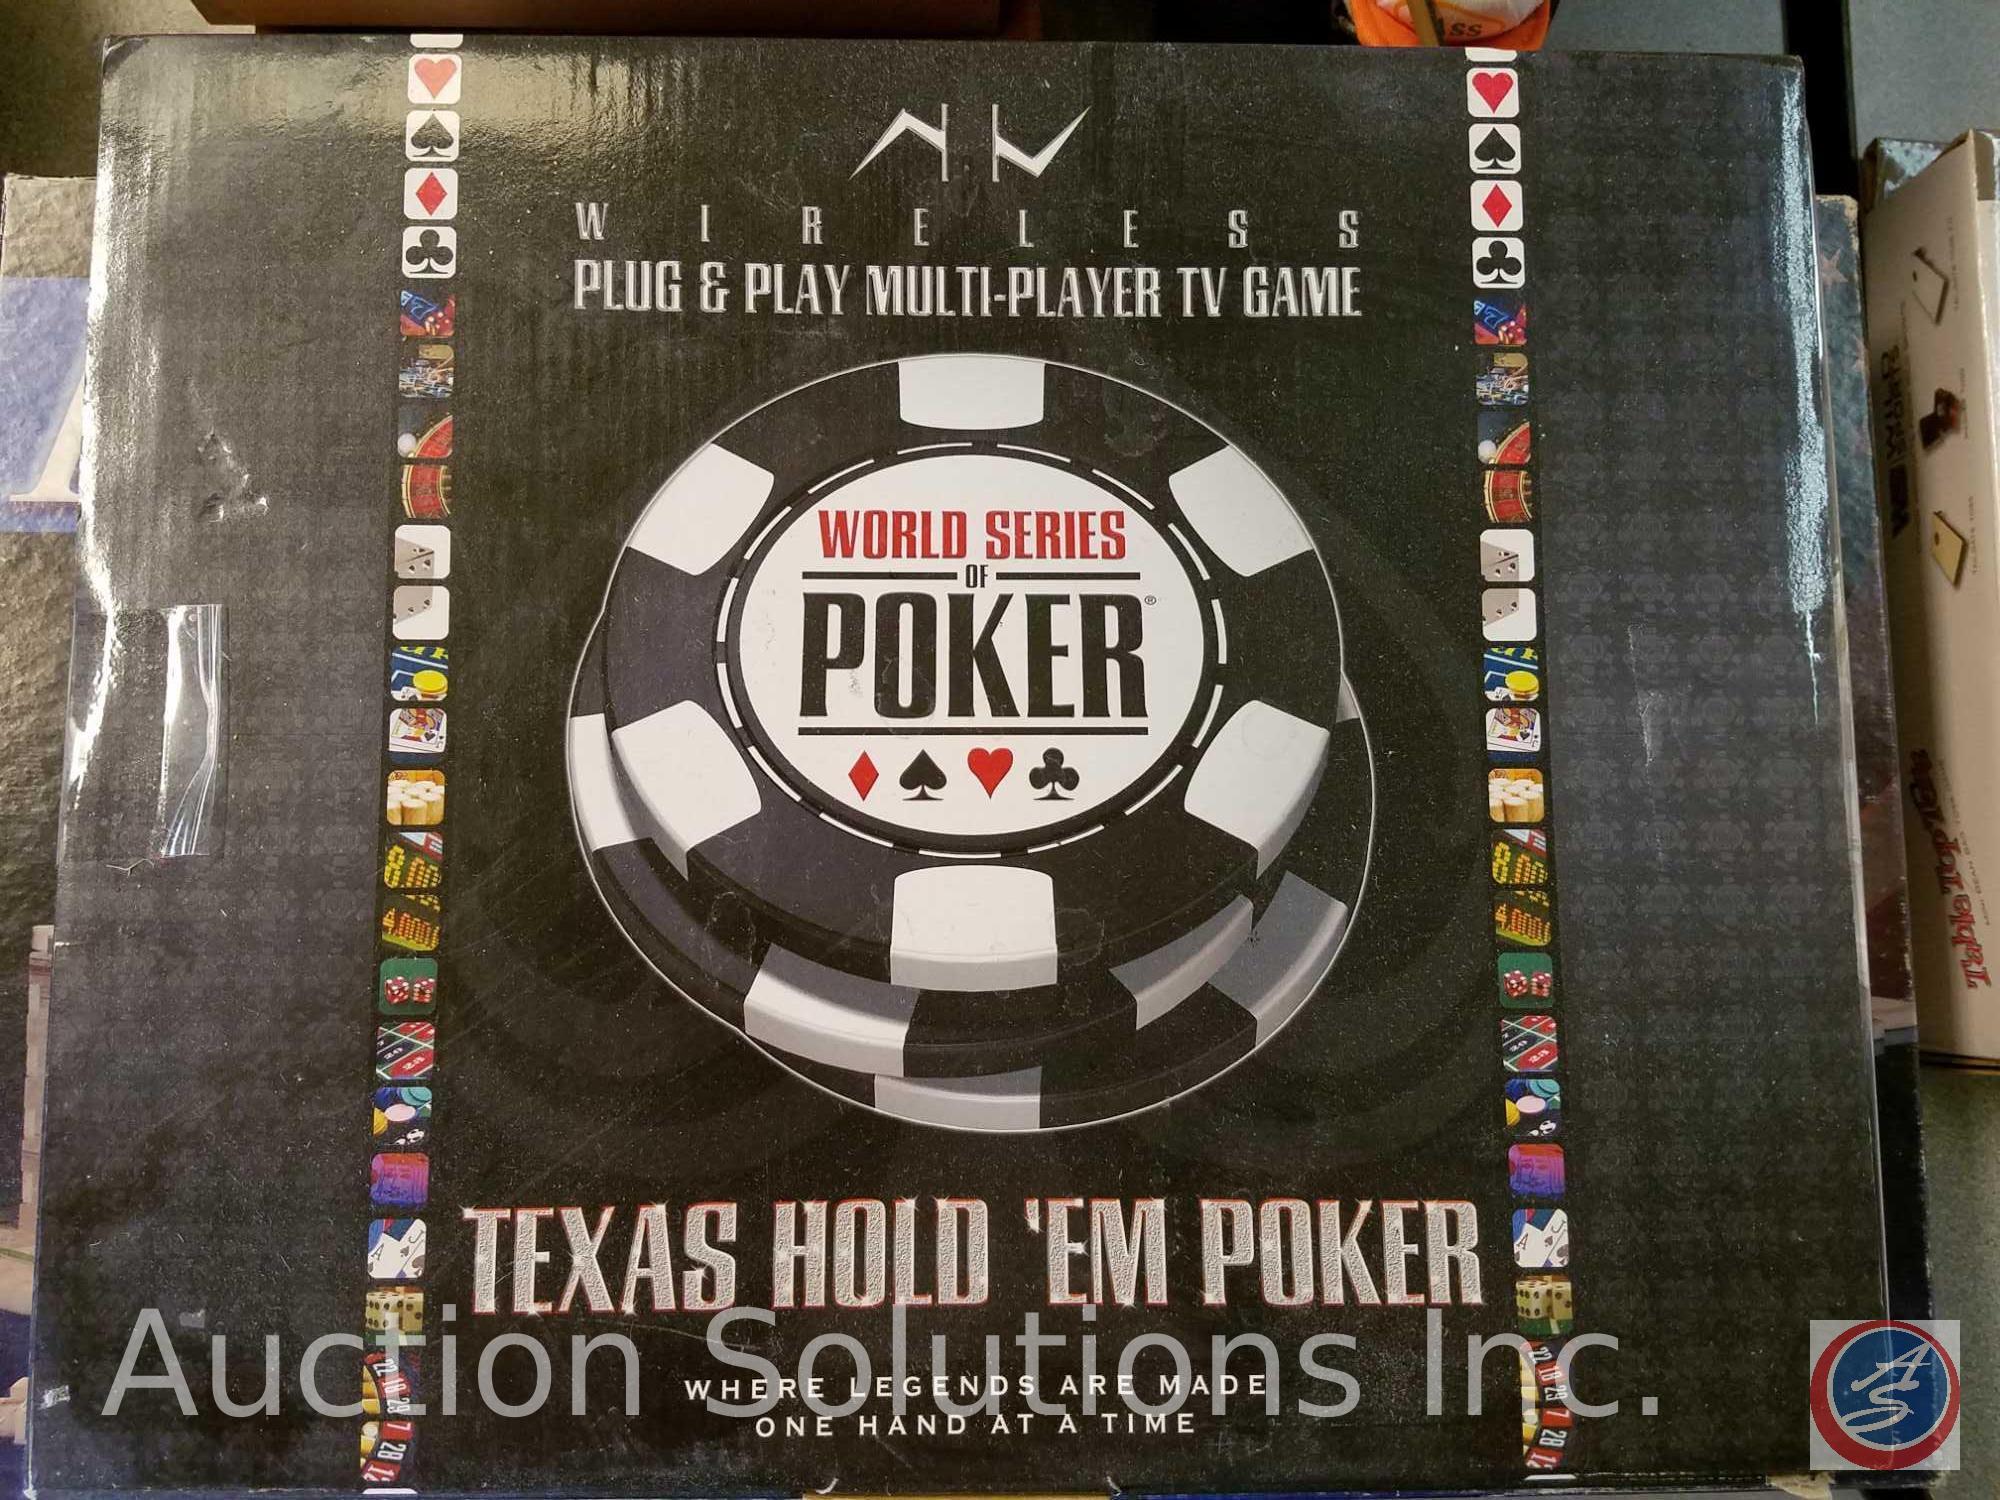 Mini Bean bag toss game Table Top Toss, Plug and Pay Multiplayer tv game Texas Hold Em Poker, Puzz